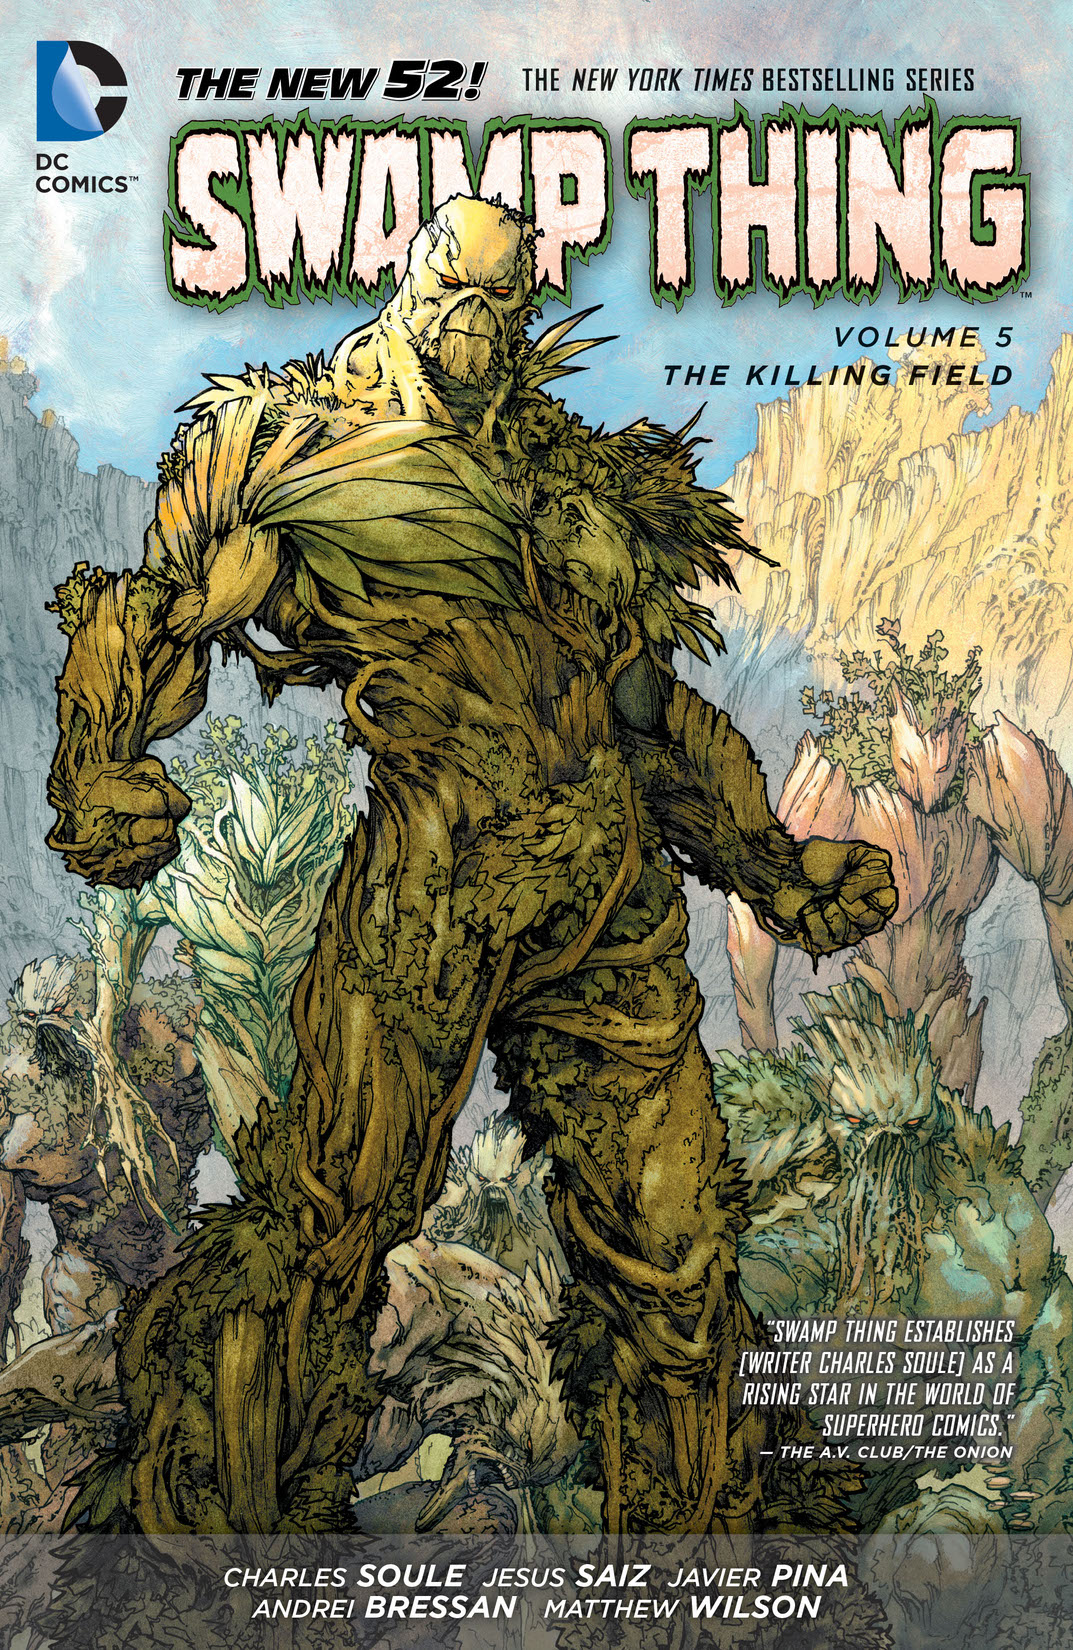 Swamp Thing Vol. 5: The Killing Field preview images